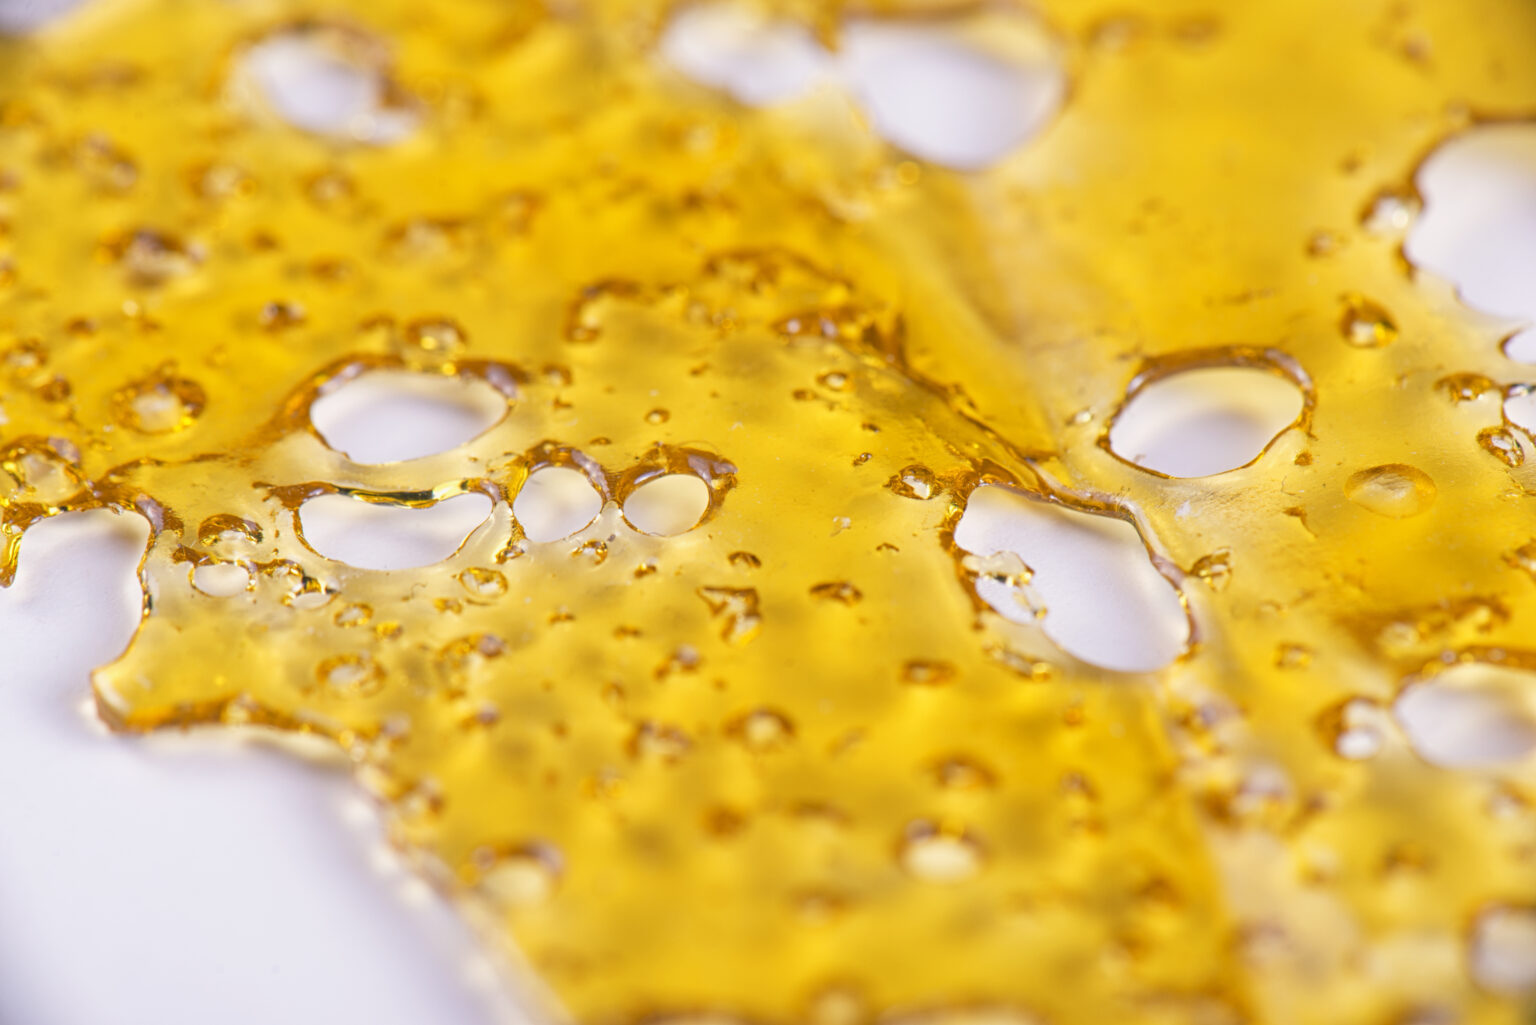 dc pot delivery shatter prices